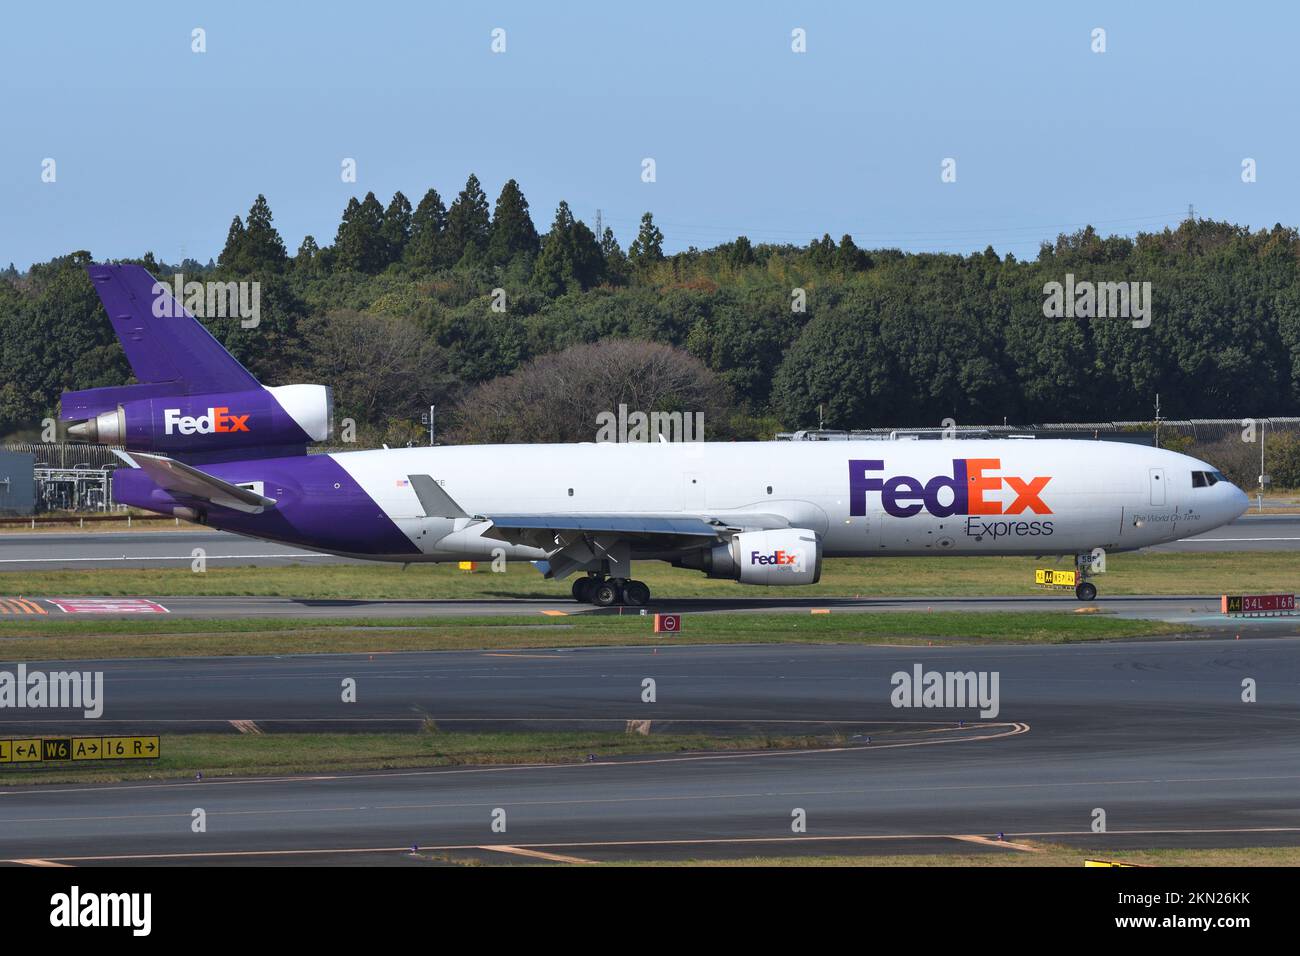 Chiba Prefecture, Japan - October 29, 2021: FedEx McDonnell Douglas MD-11F (N585FE) freighter. Stock Photo